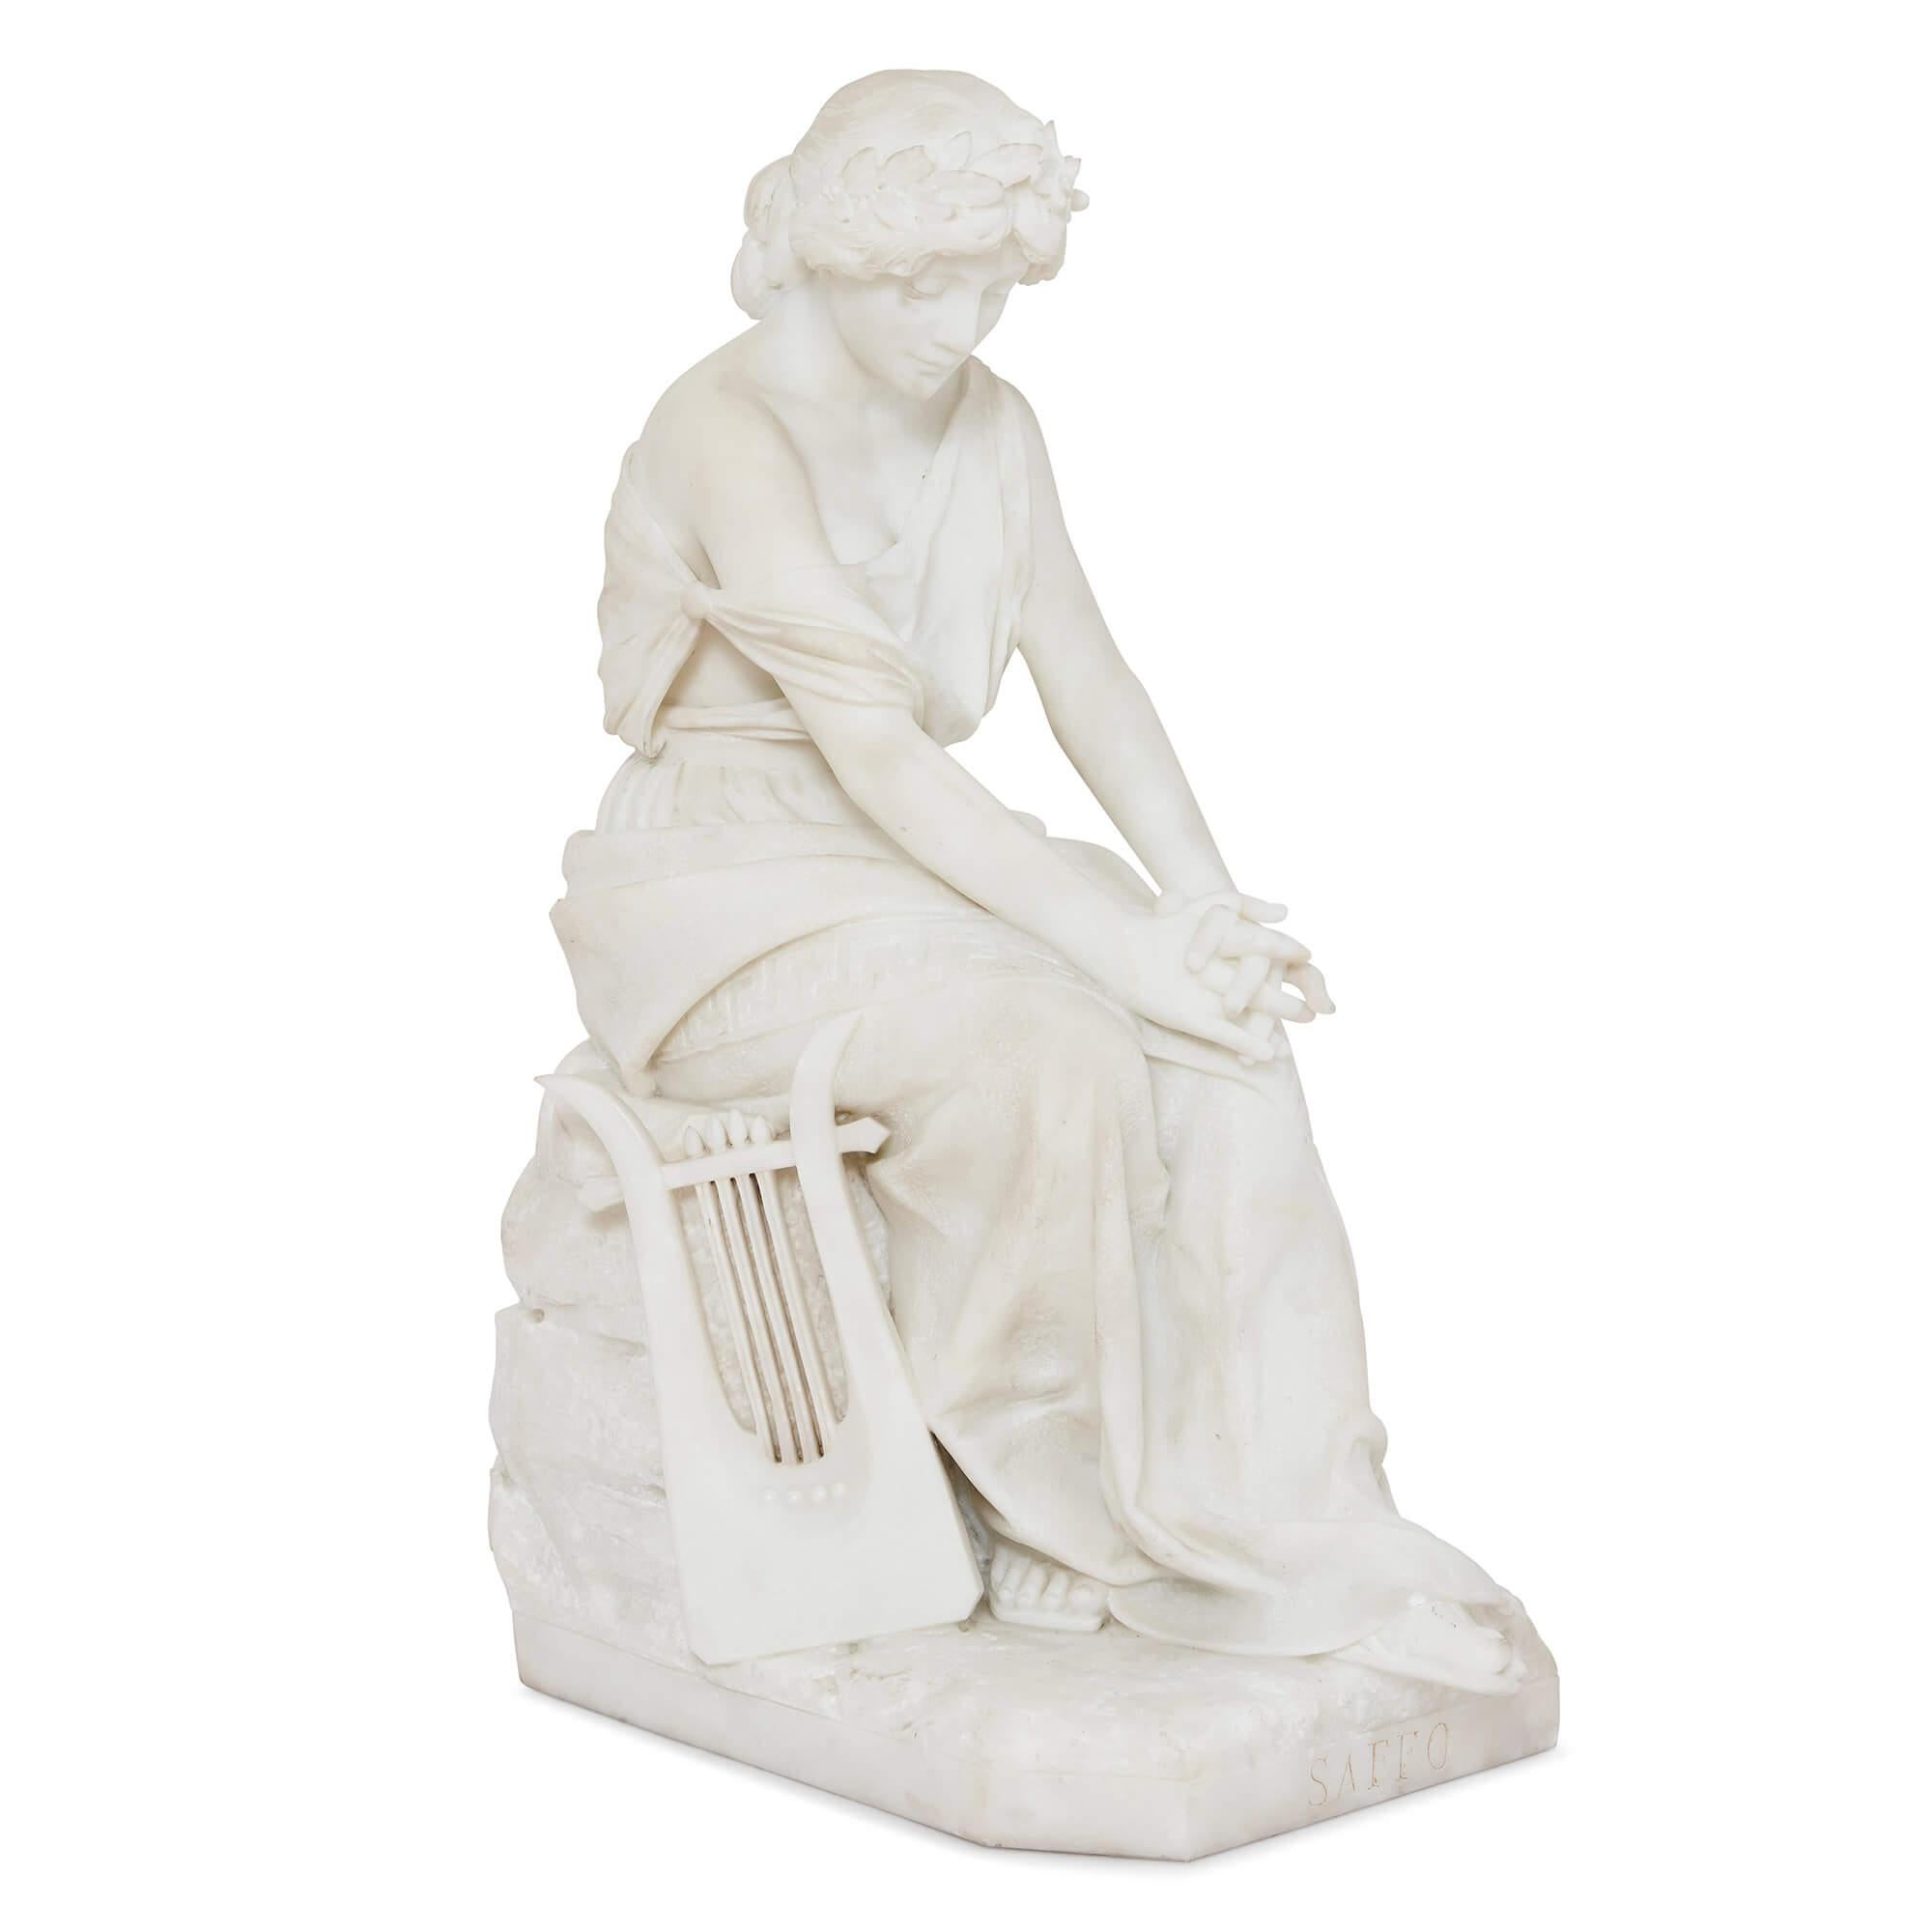 This marble sculpture of the Greek poet Sappho was created in Florence by the esteemed Polish sculptor, Mieczyslaw Leon Zawiejski. Sappho is depicted in a seated position with her hands clasped together on her knee and her eyes lowered. She wears a